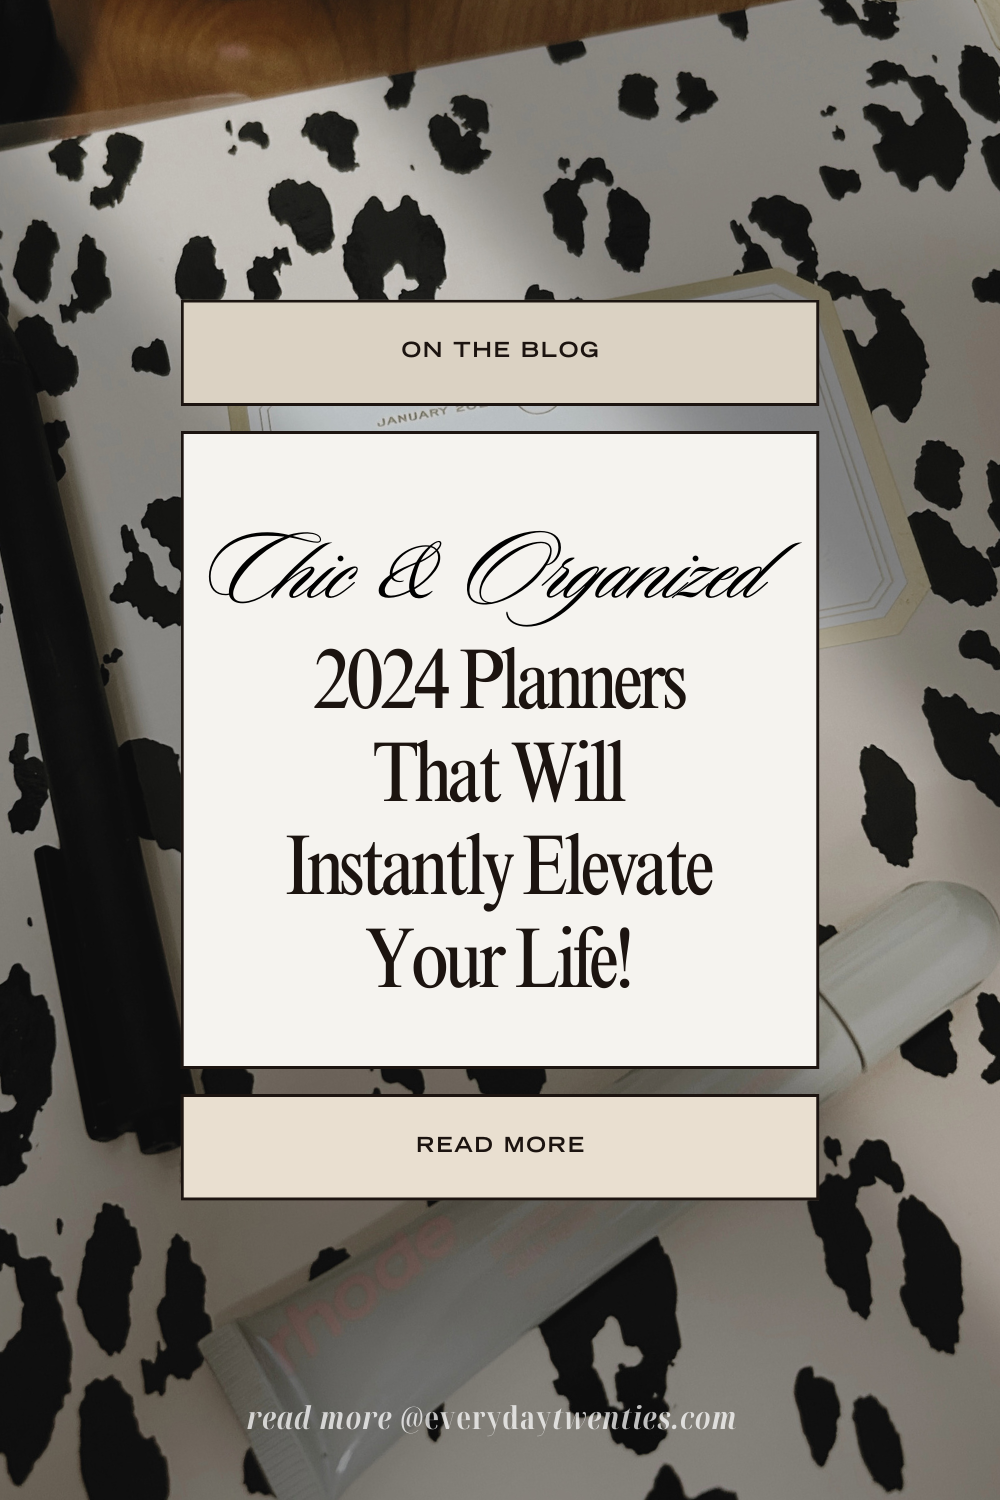 Pinterest infographic about chic and organized 2024 planners that will instantly elevate your life